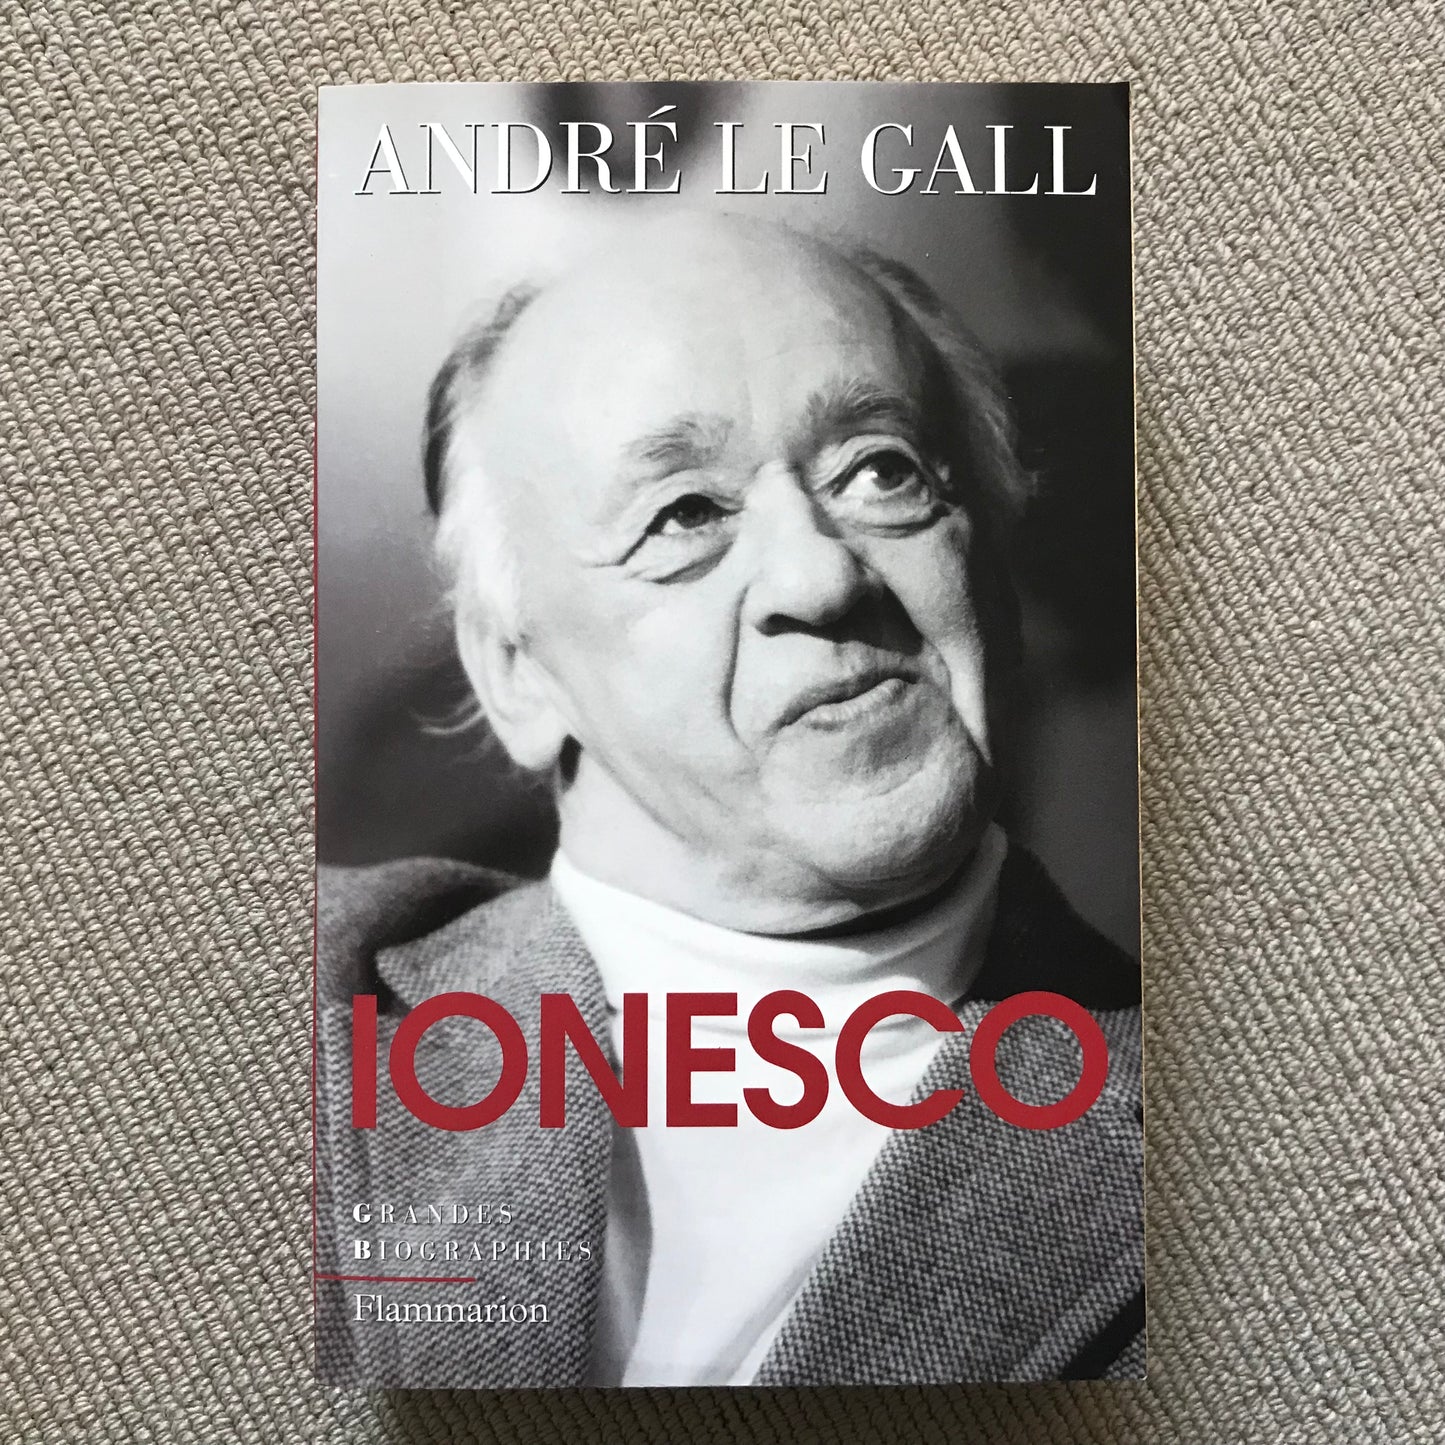 Ionesco - André Le Gall